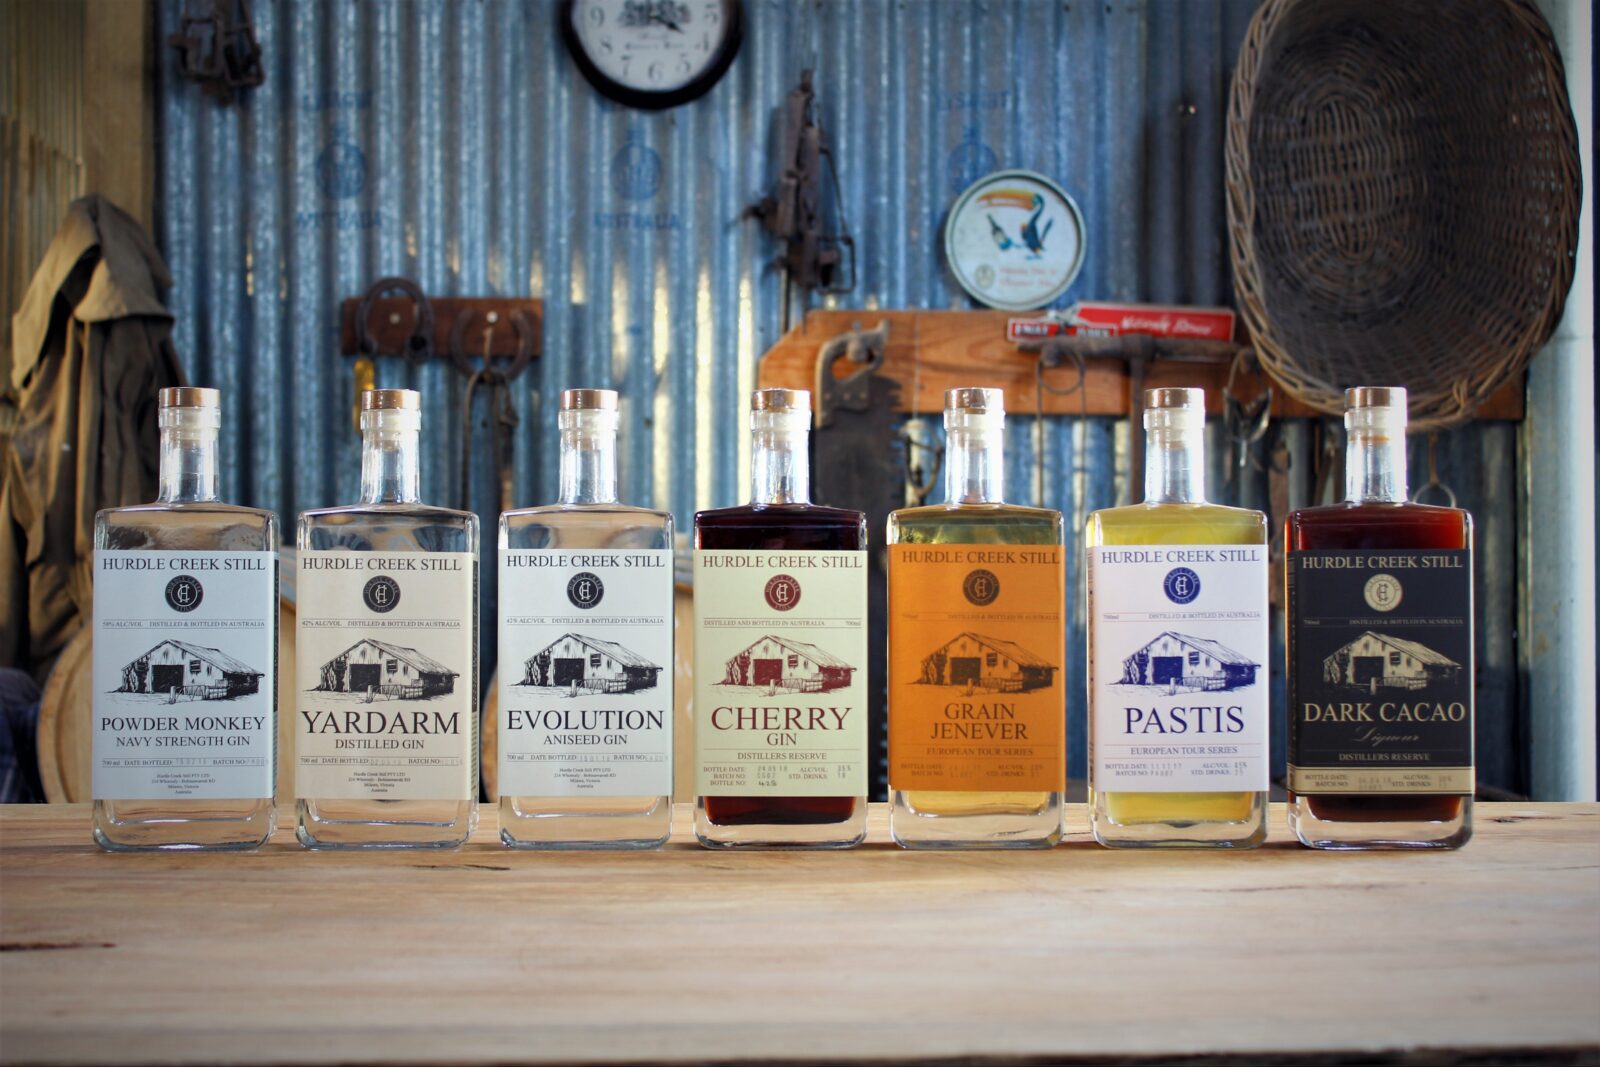 Hurdle Creek Still Products - Distilled on site